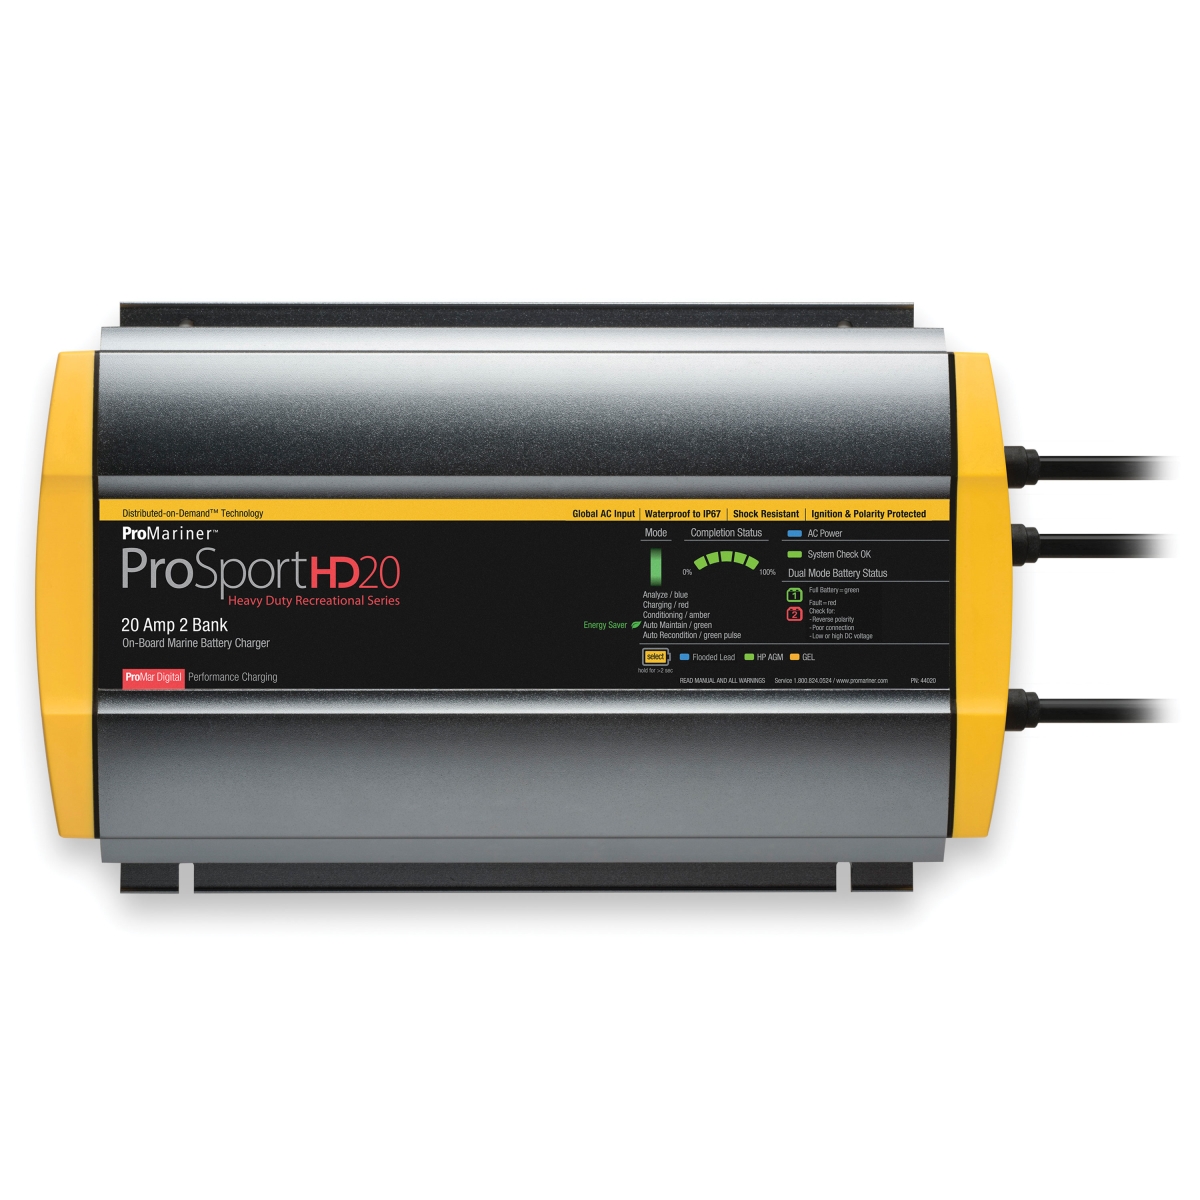 Pro Mariner Promariner 3006.1094 44020 ProSportHD Series Battery Charger - 20 Amp